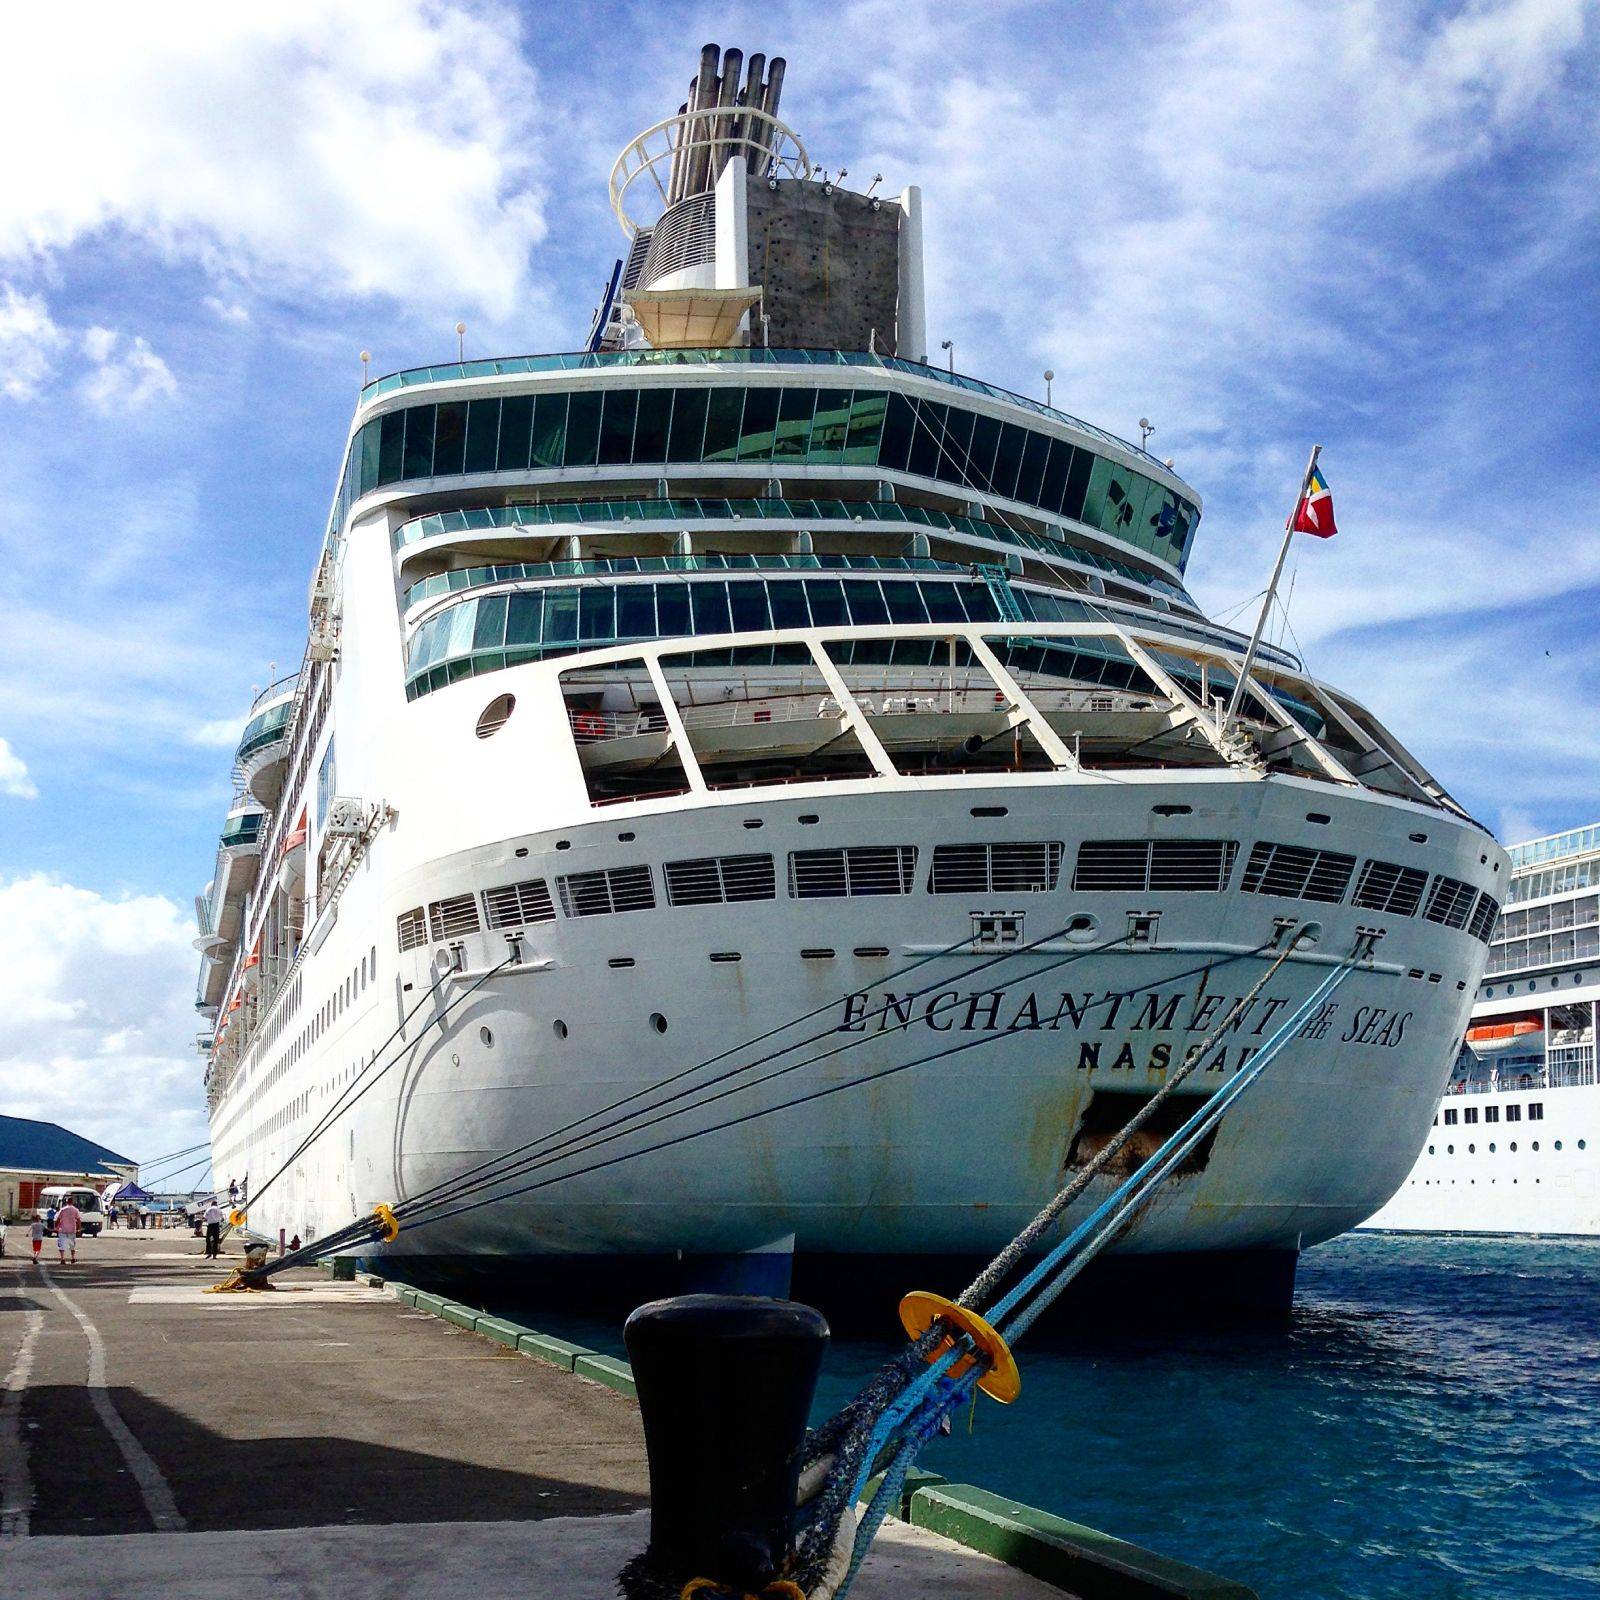 Bahamas cruise. Our liner "Enchantment of the Seas".